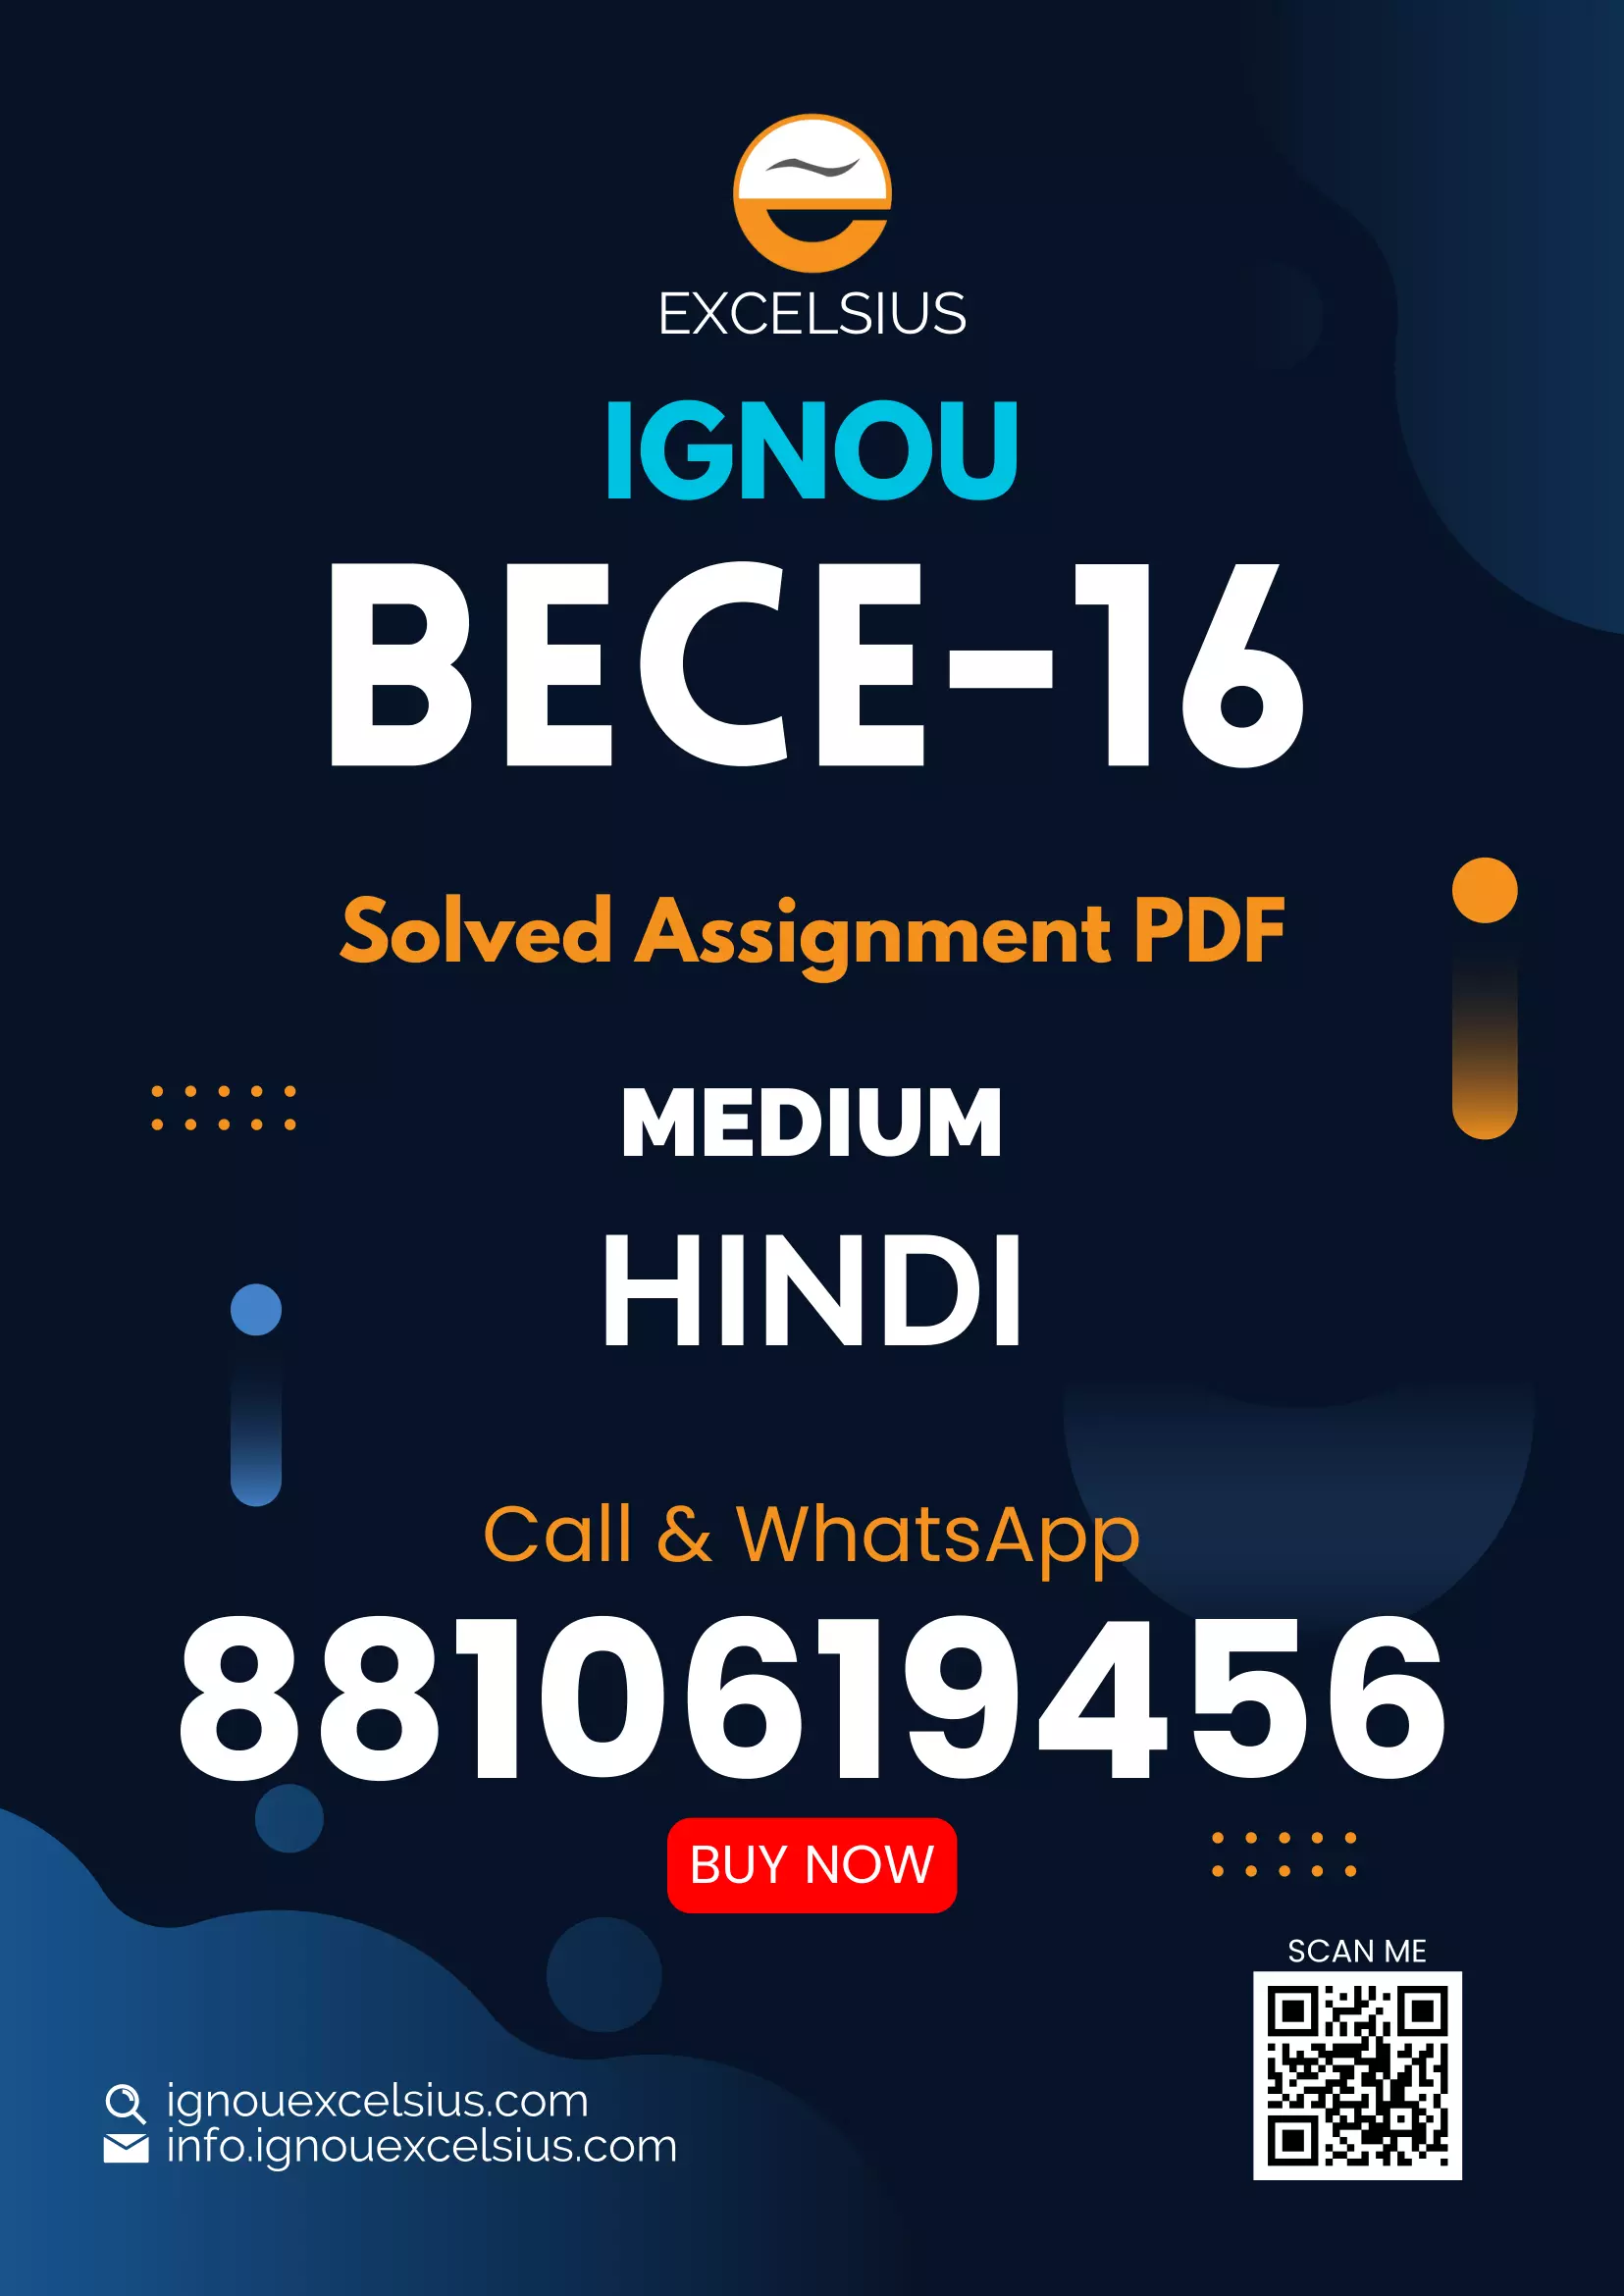 IGNOU BECE-16 - Economic Development: Comparative Analysis and Contemporary Issues, Latest Solved Assignment-July 2022 – January 2023